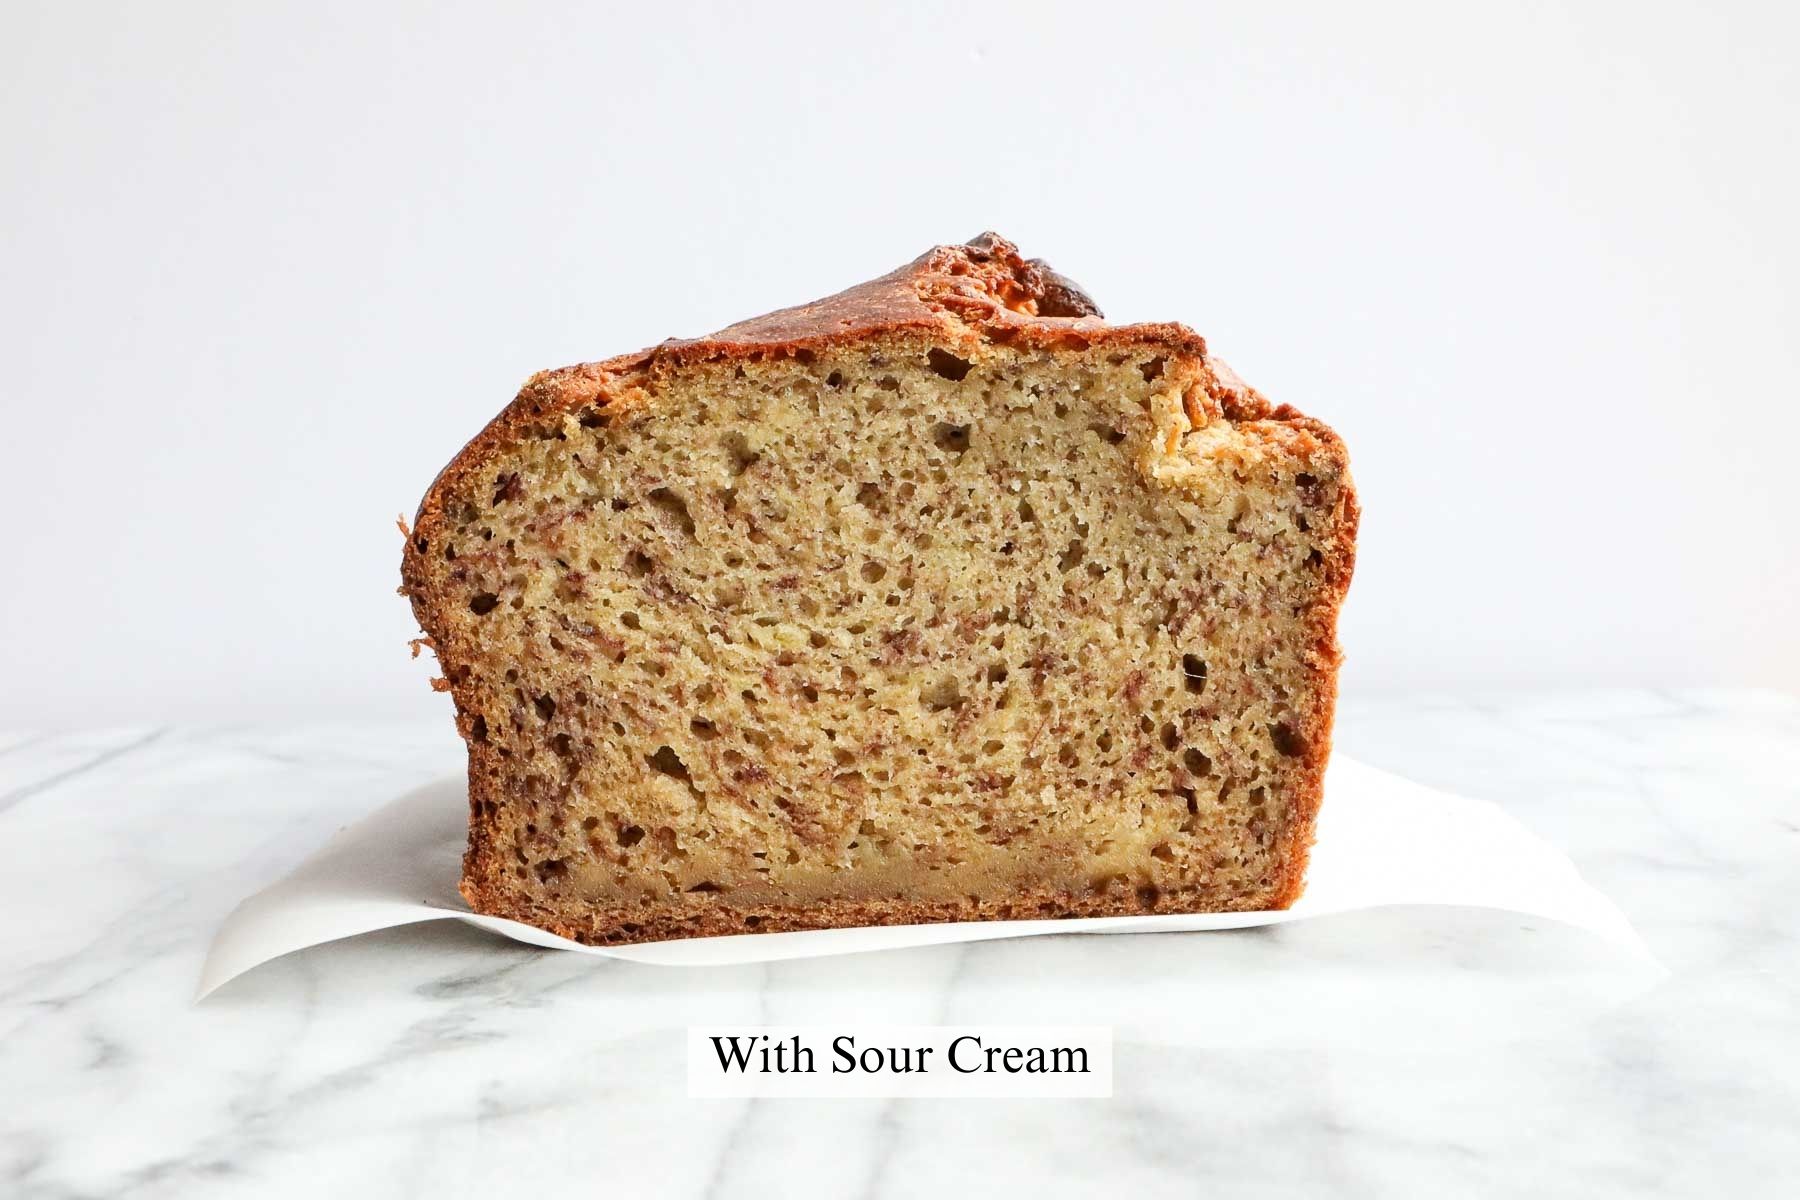 A cross section of a loaf of banana bread made with sour cream.